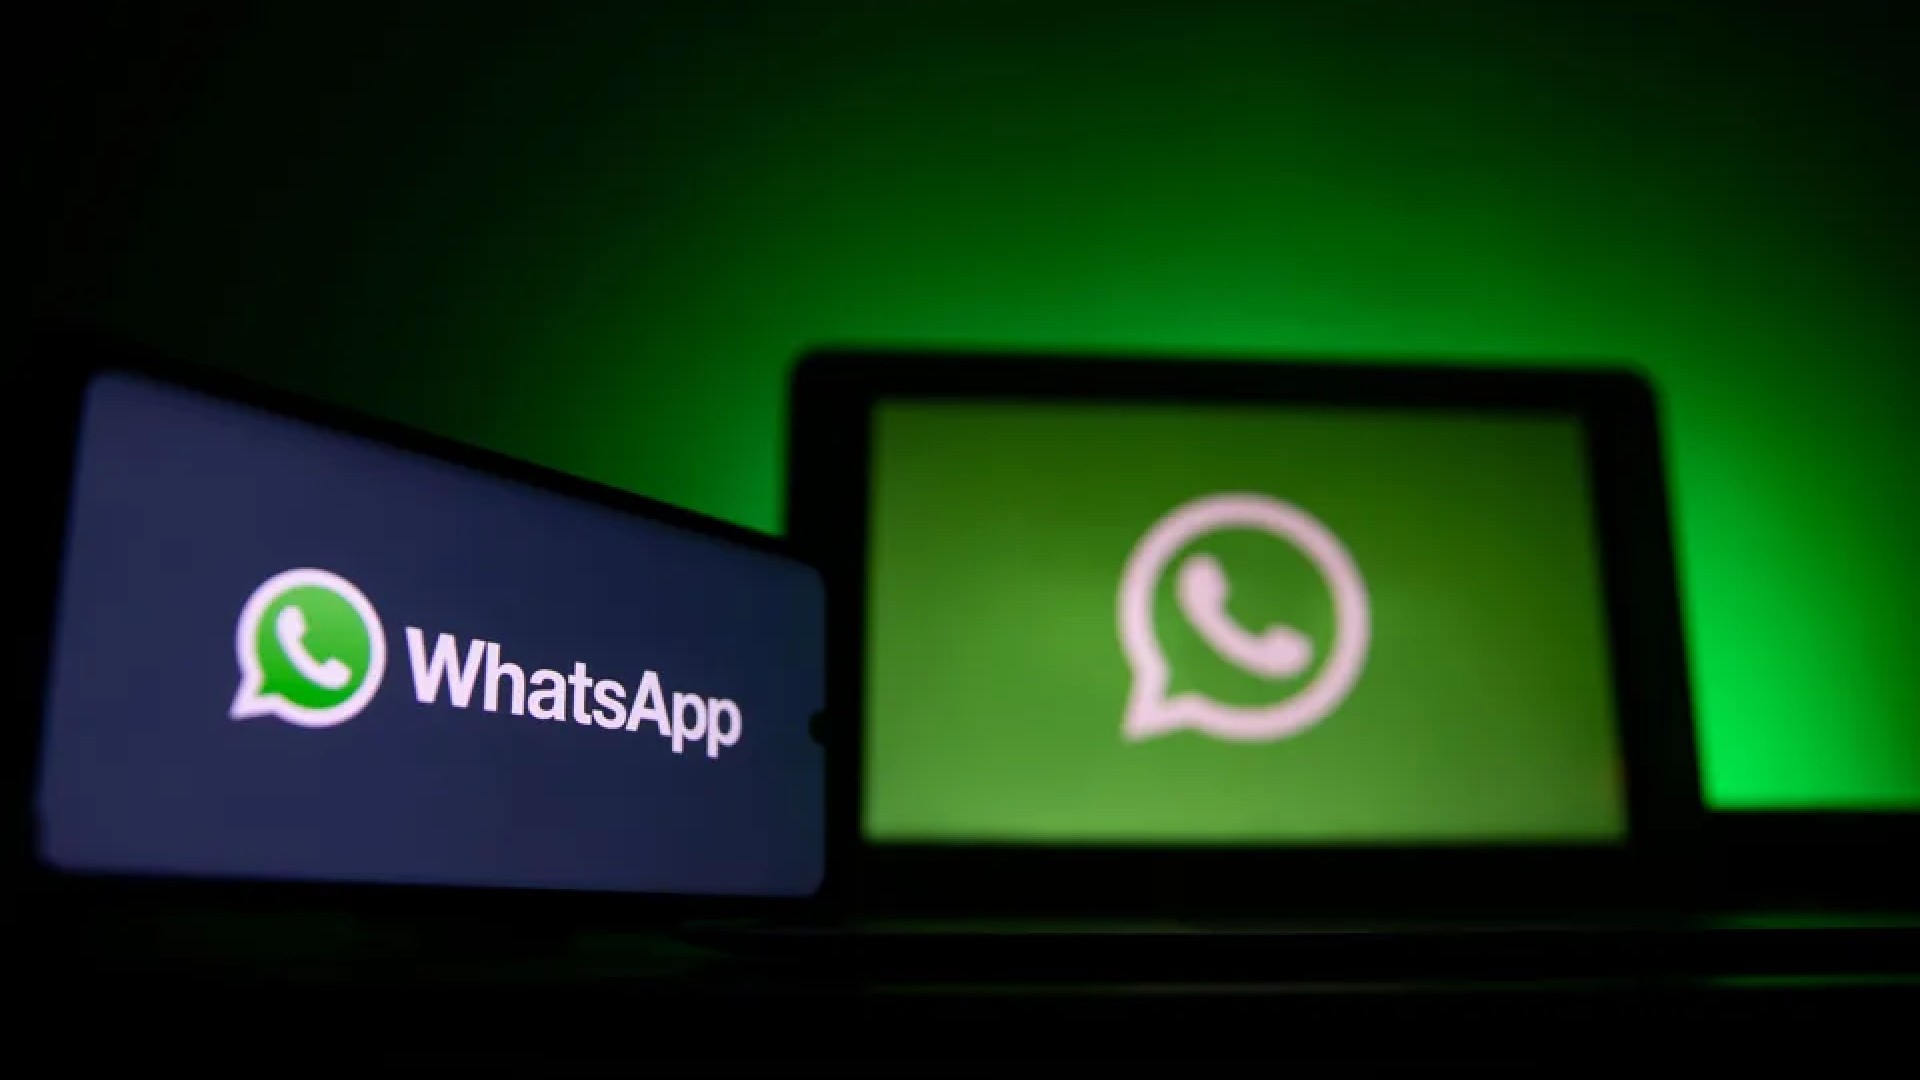 WhatsApp Is Evaluating Secure End-To-End Encrypted Cloud Backups for Android.